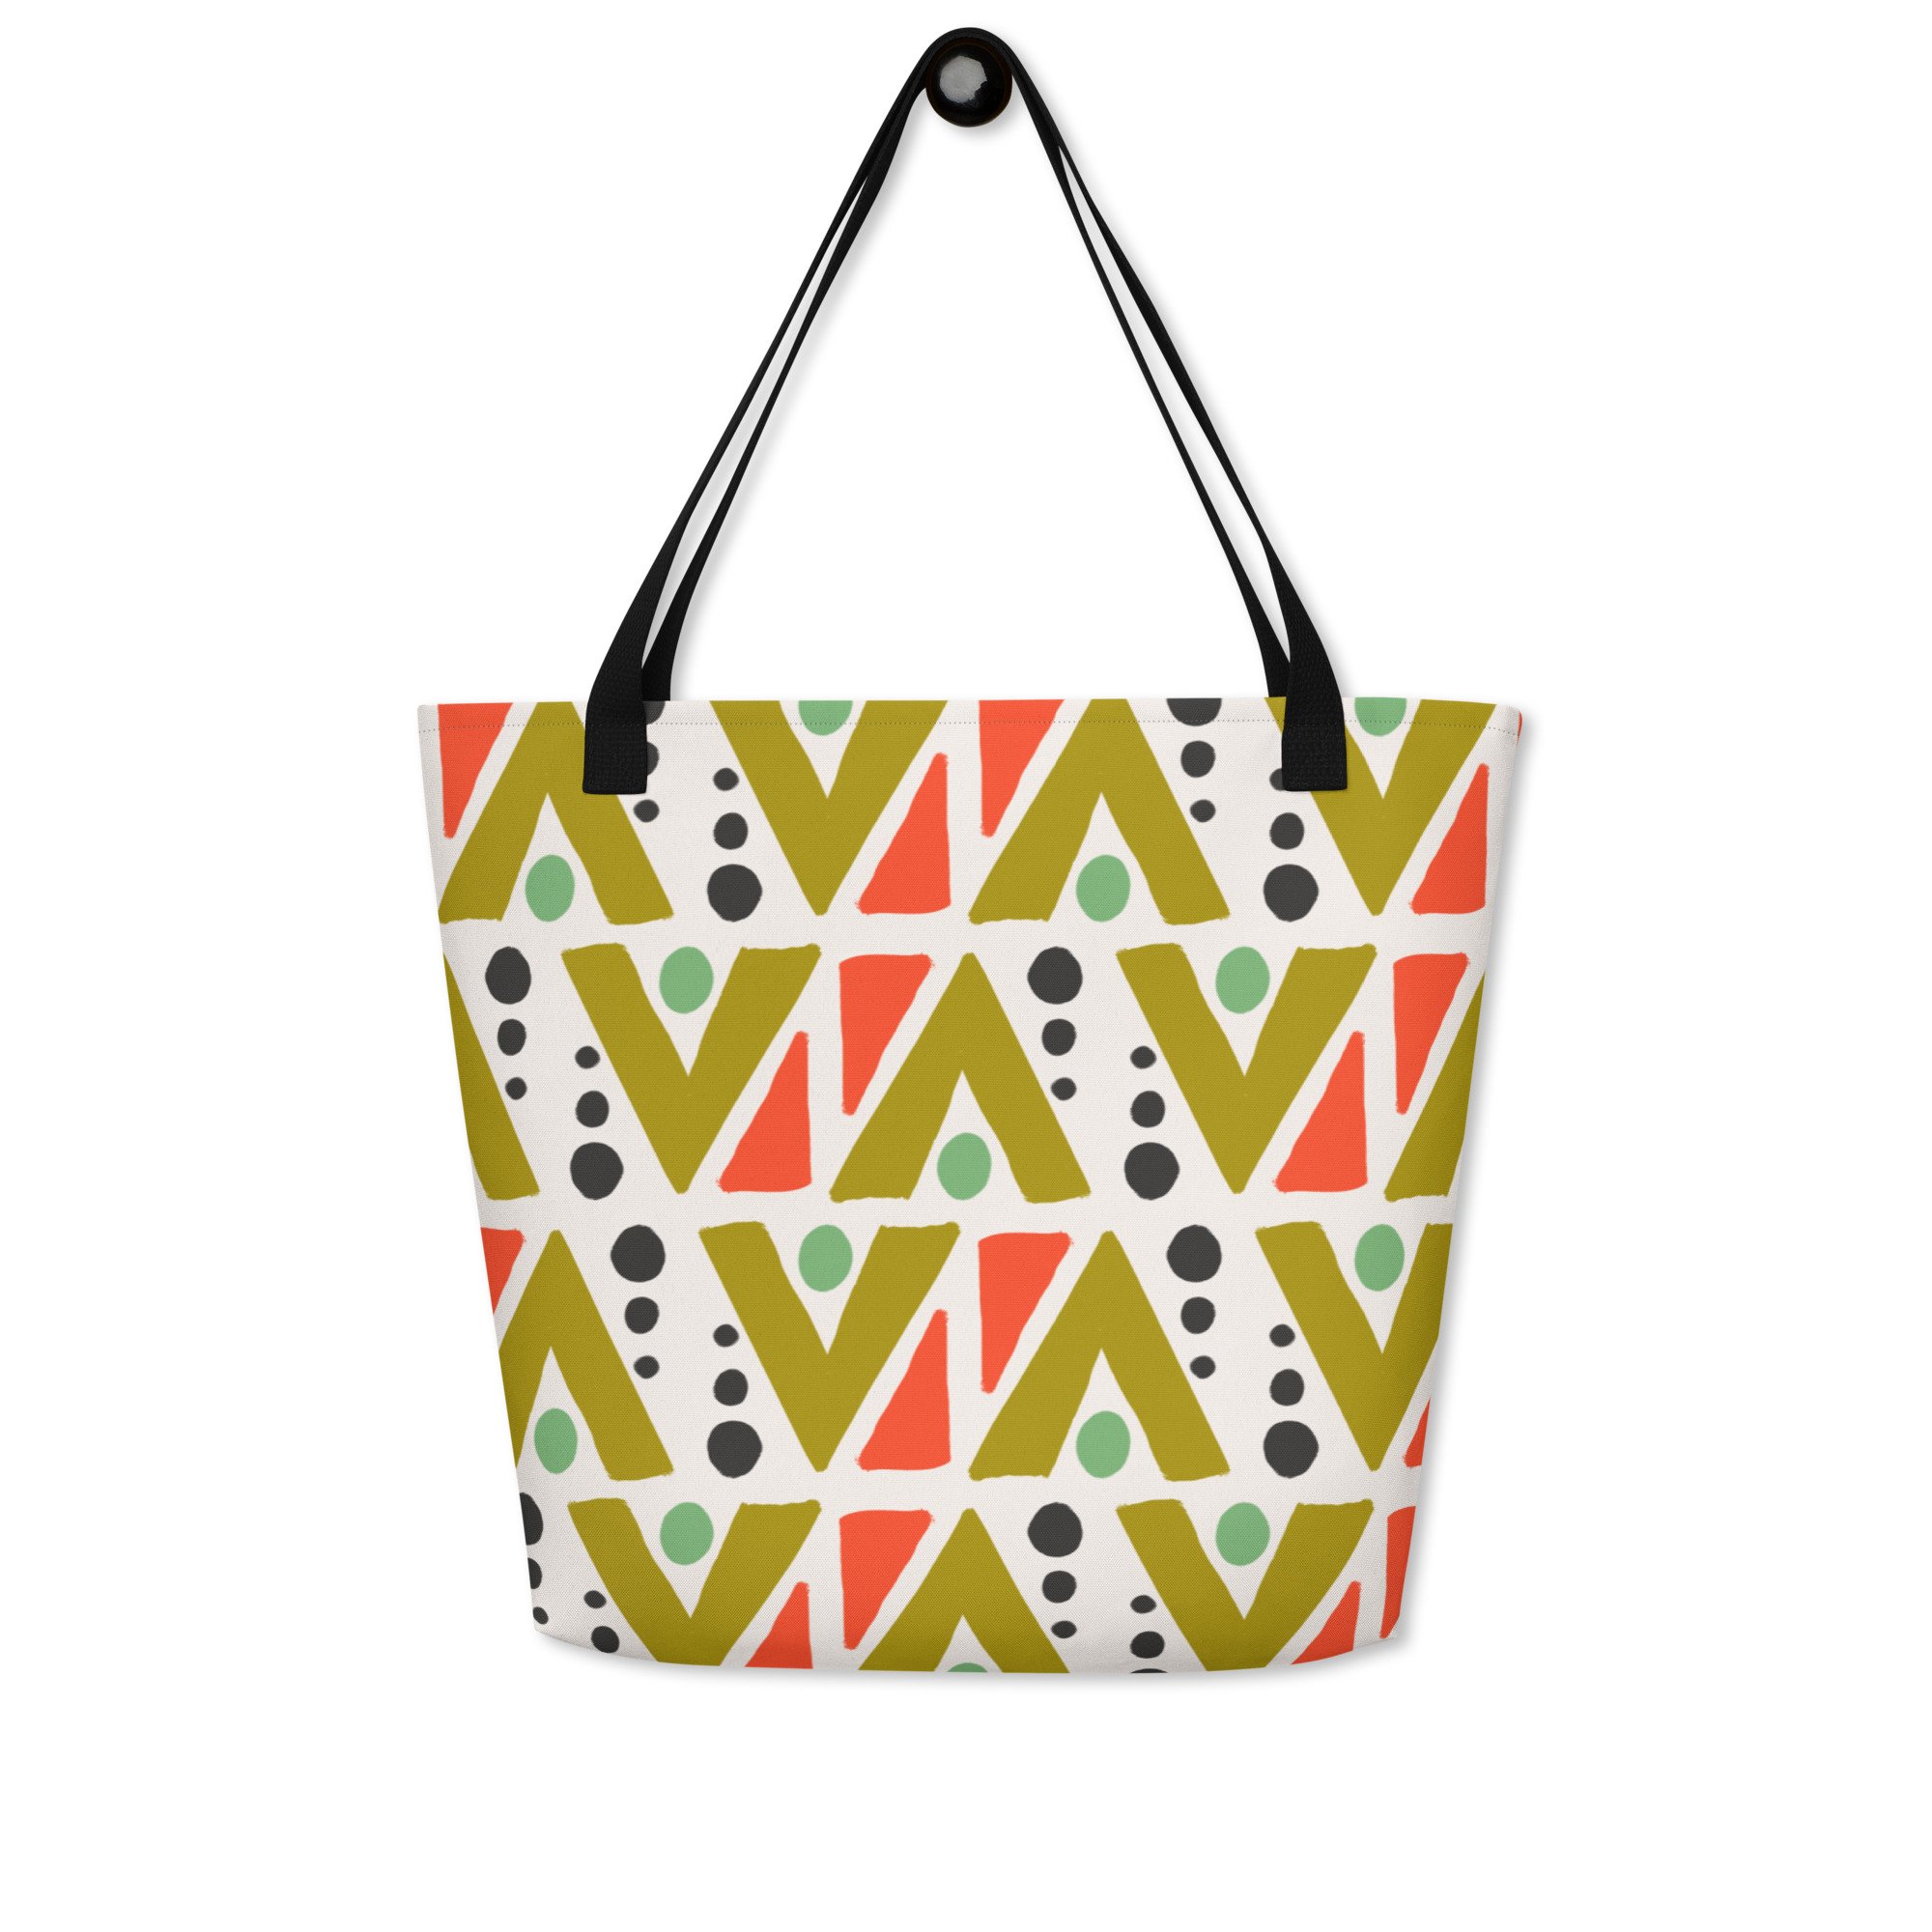 all-over-print-large-tote-bag-w-pocket-black-front-65a4499e8dd14.jpg